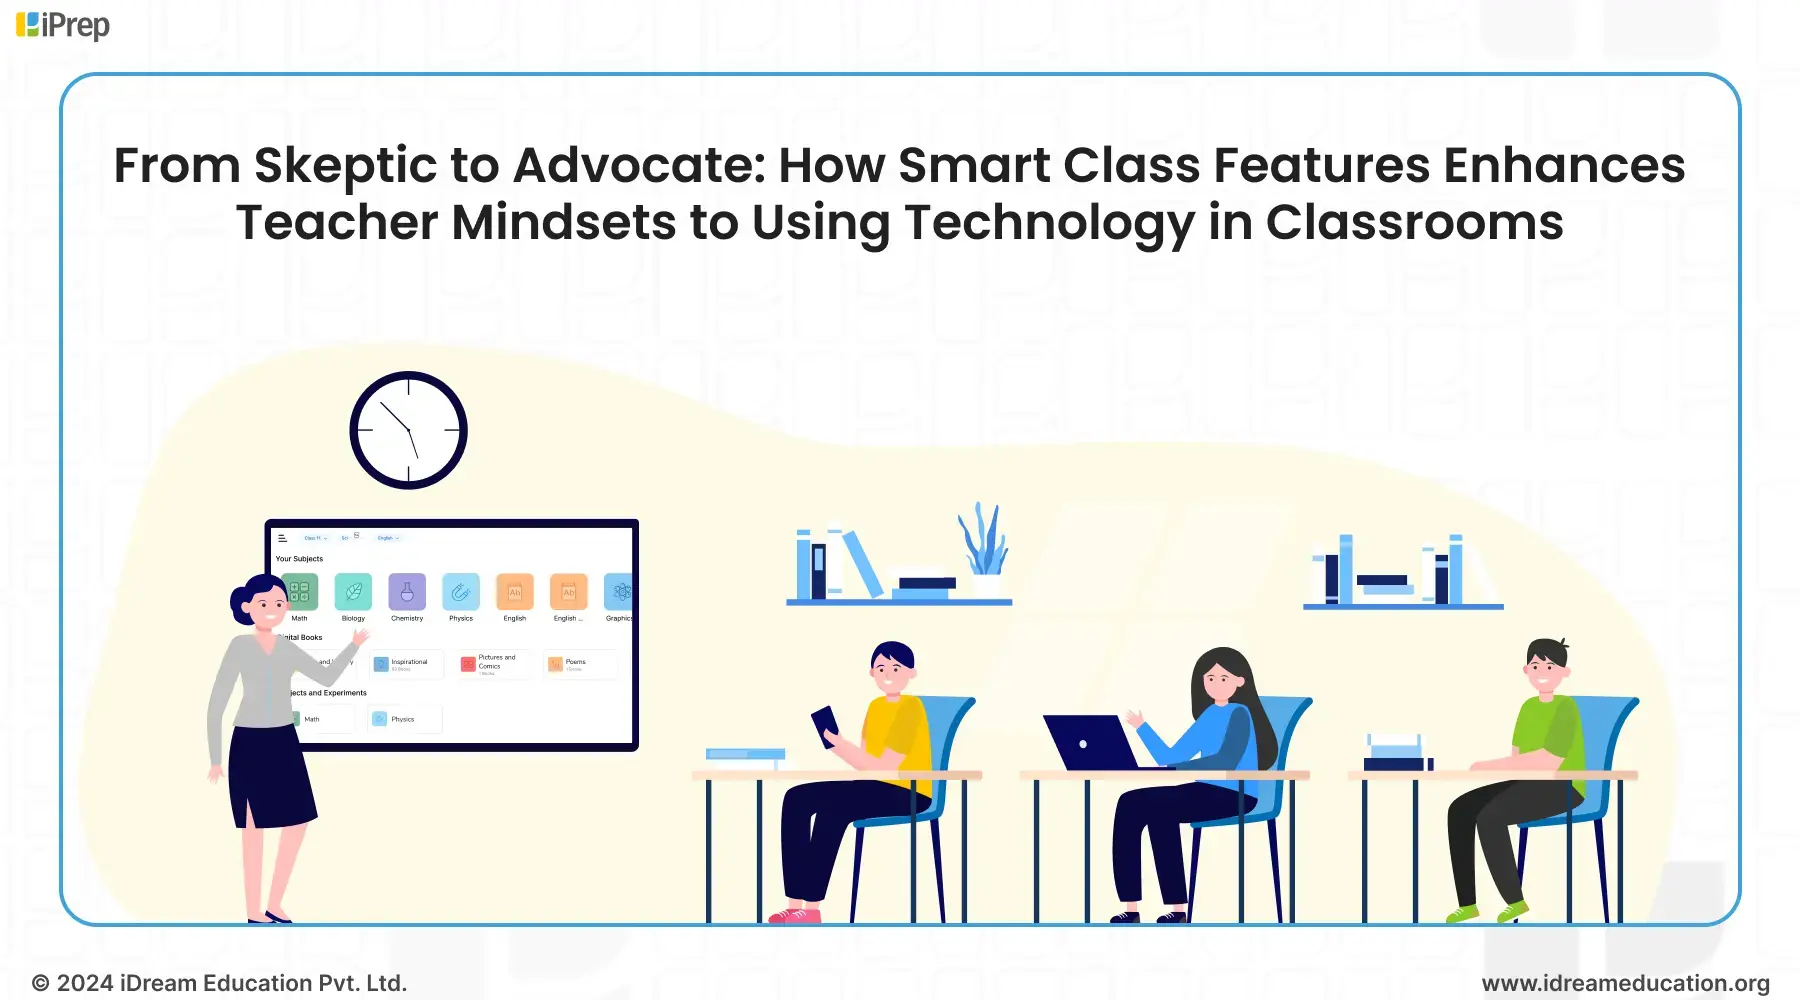 An illustration highlighting the use of smart class features by teachers in schools